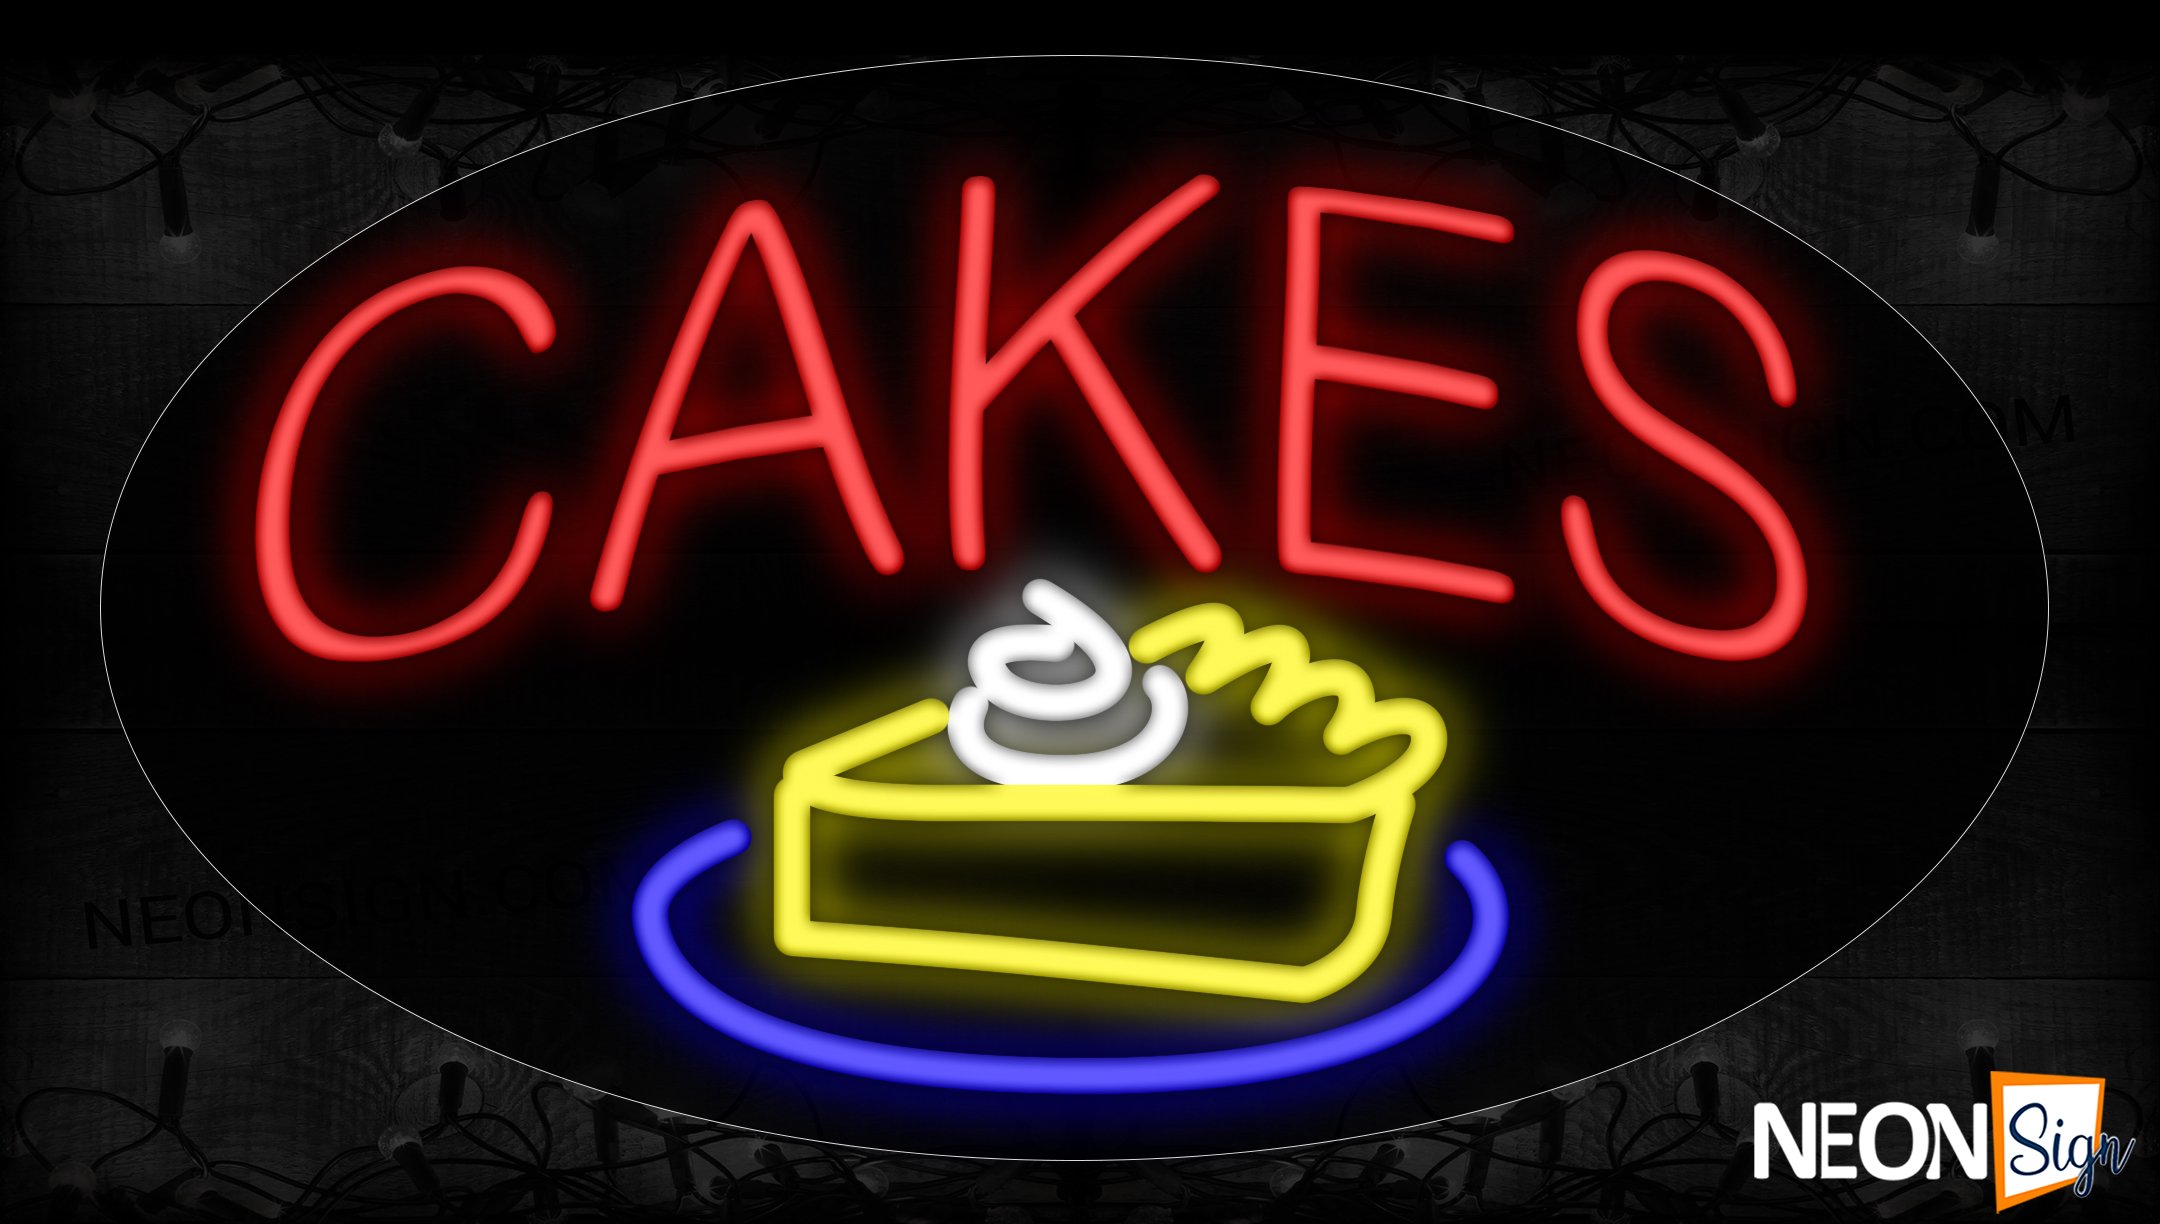 Image of 14384 Cakes with slice cake logo Neon Signs_17x30 Contoured Black Backing